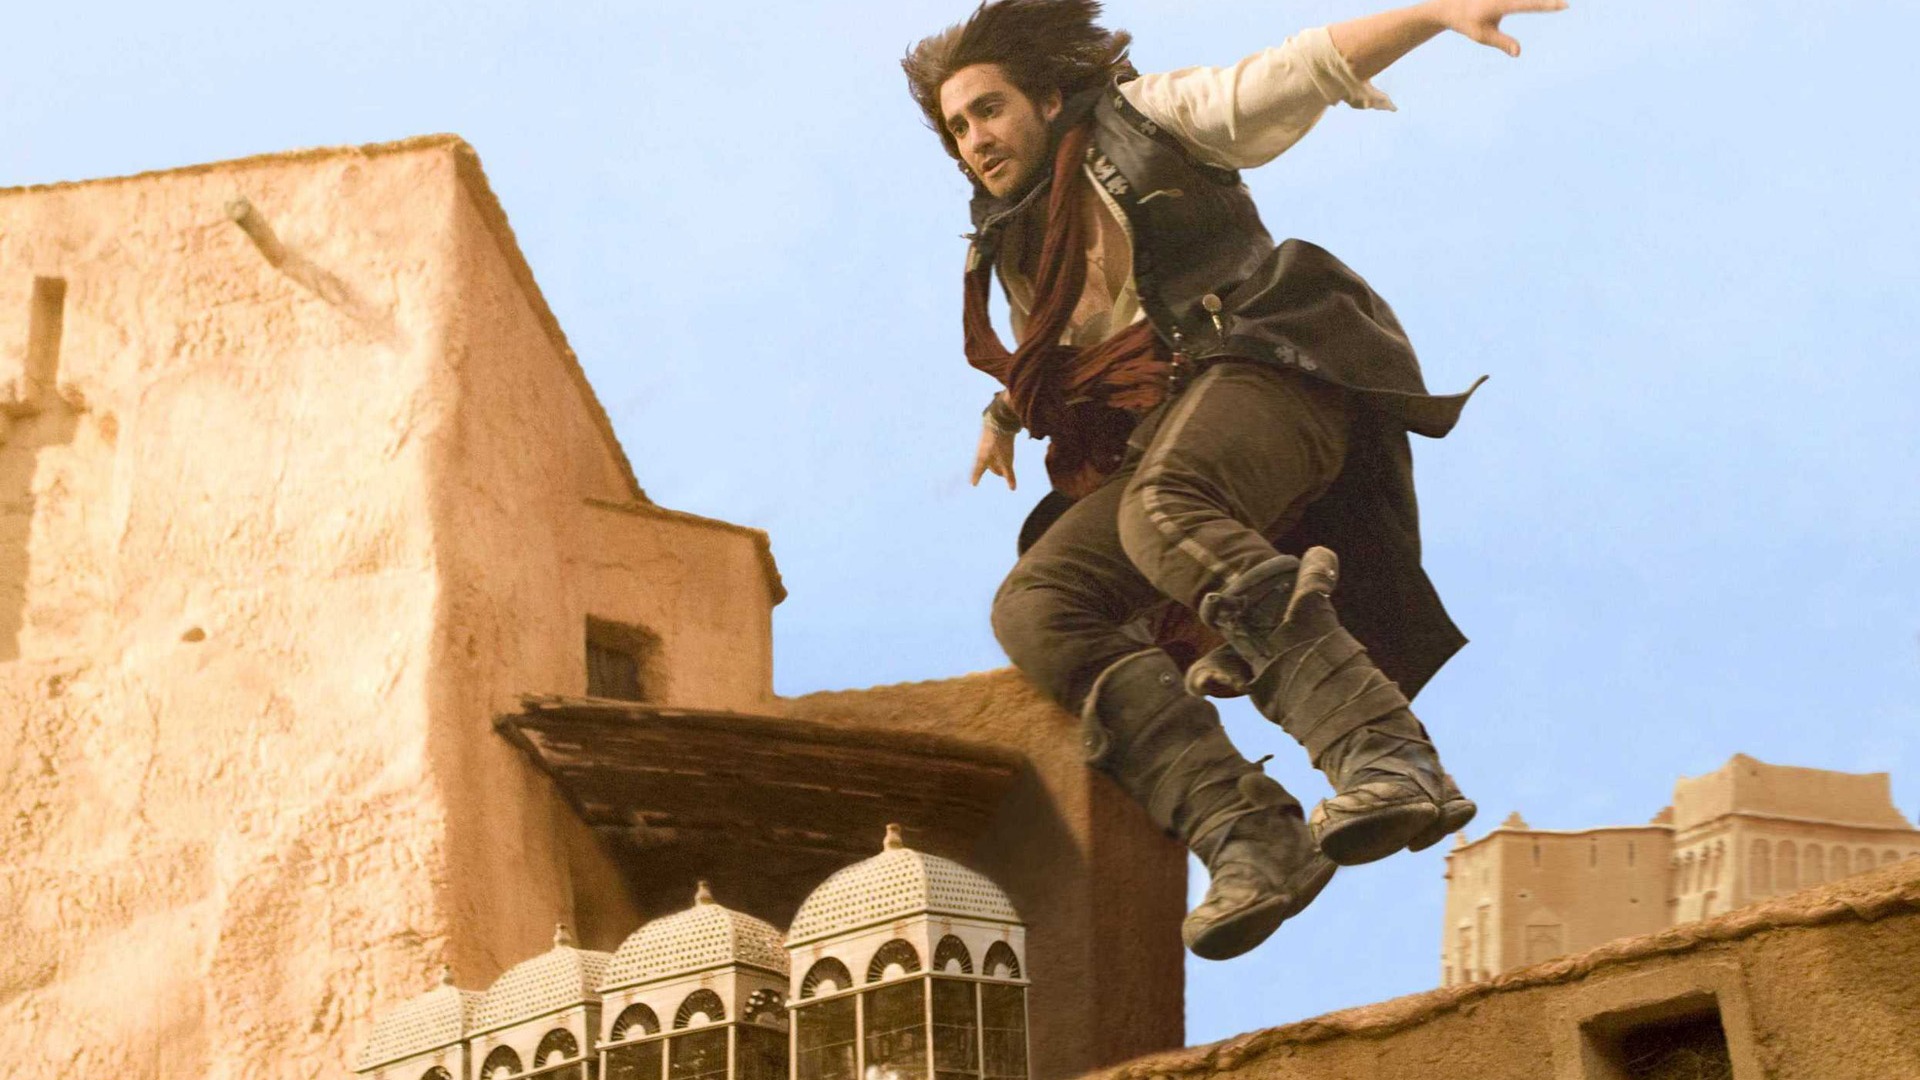 Prince of Persia The Sands of Time 波斯王子：時之刃 #12 - 1920x1080